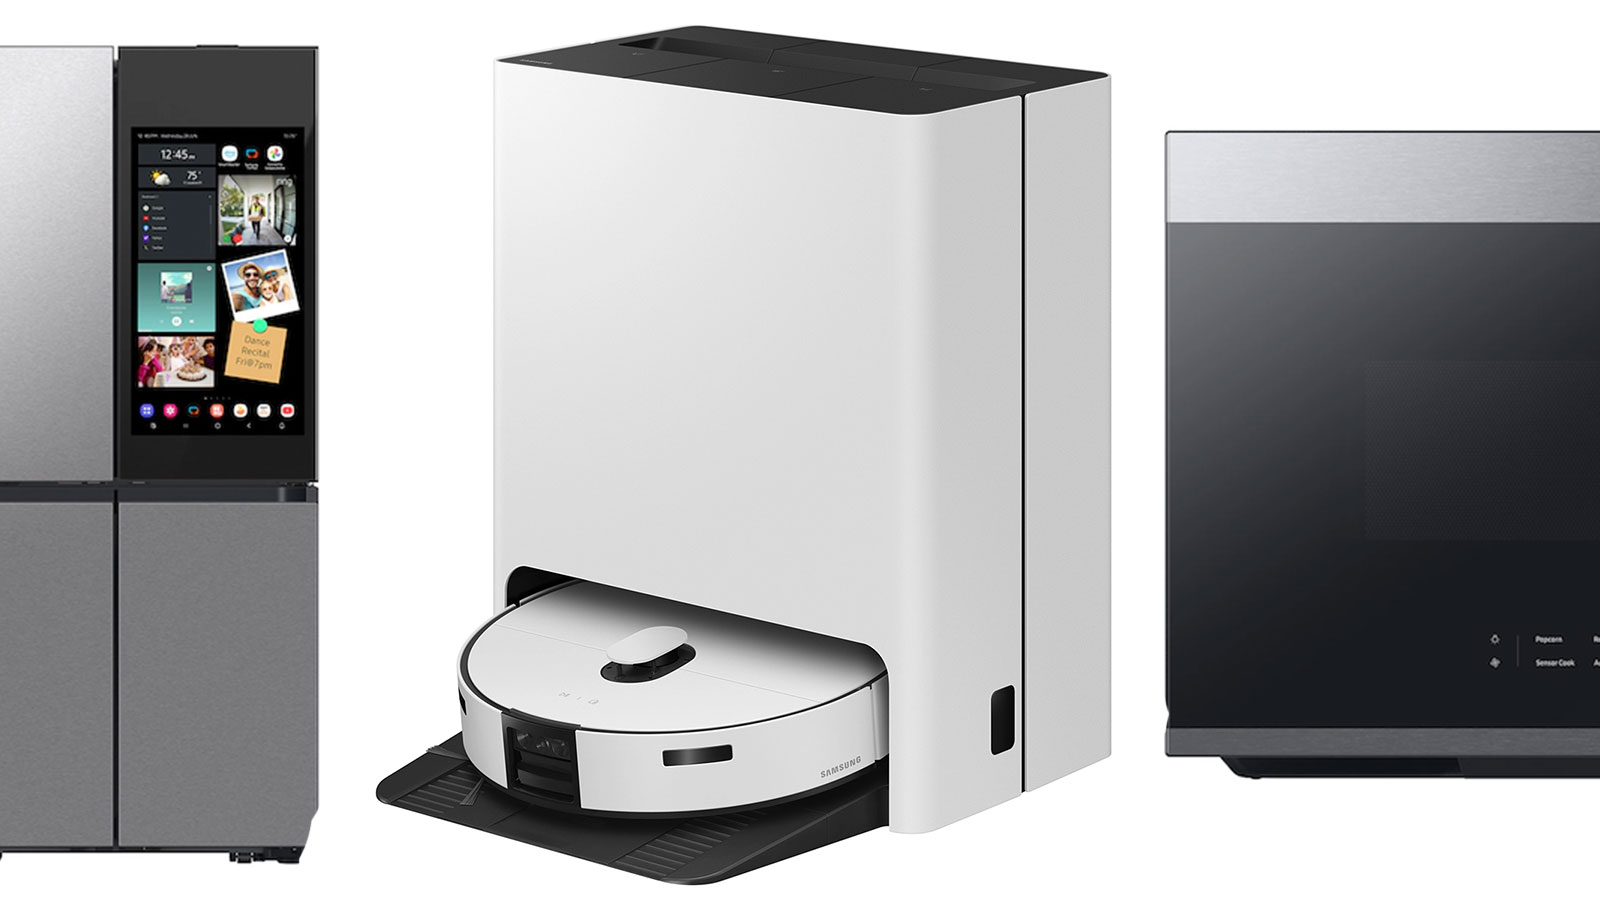 A samsung fridge, robot vacuum, and microwave on a plain background.